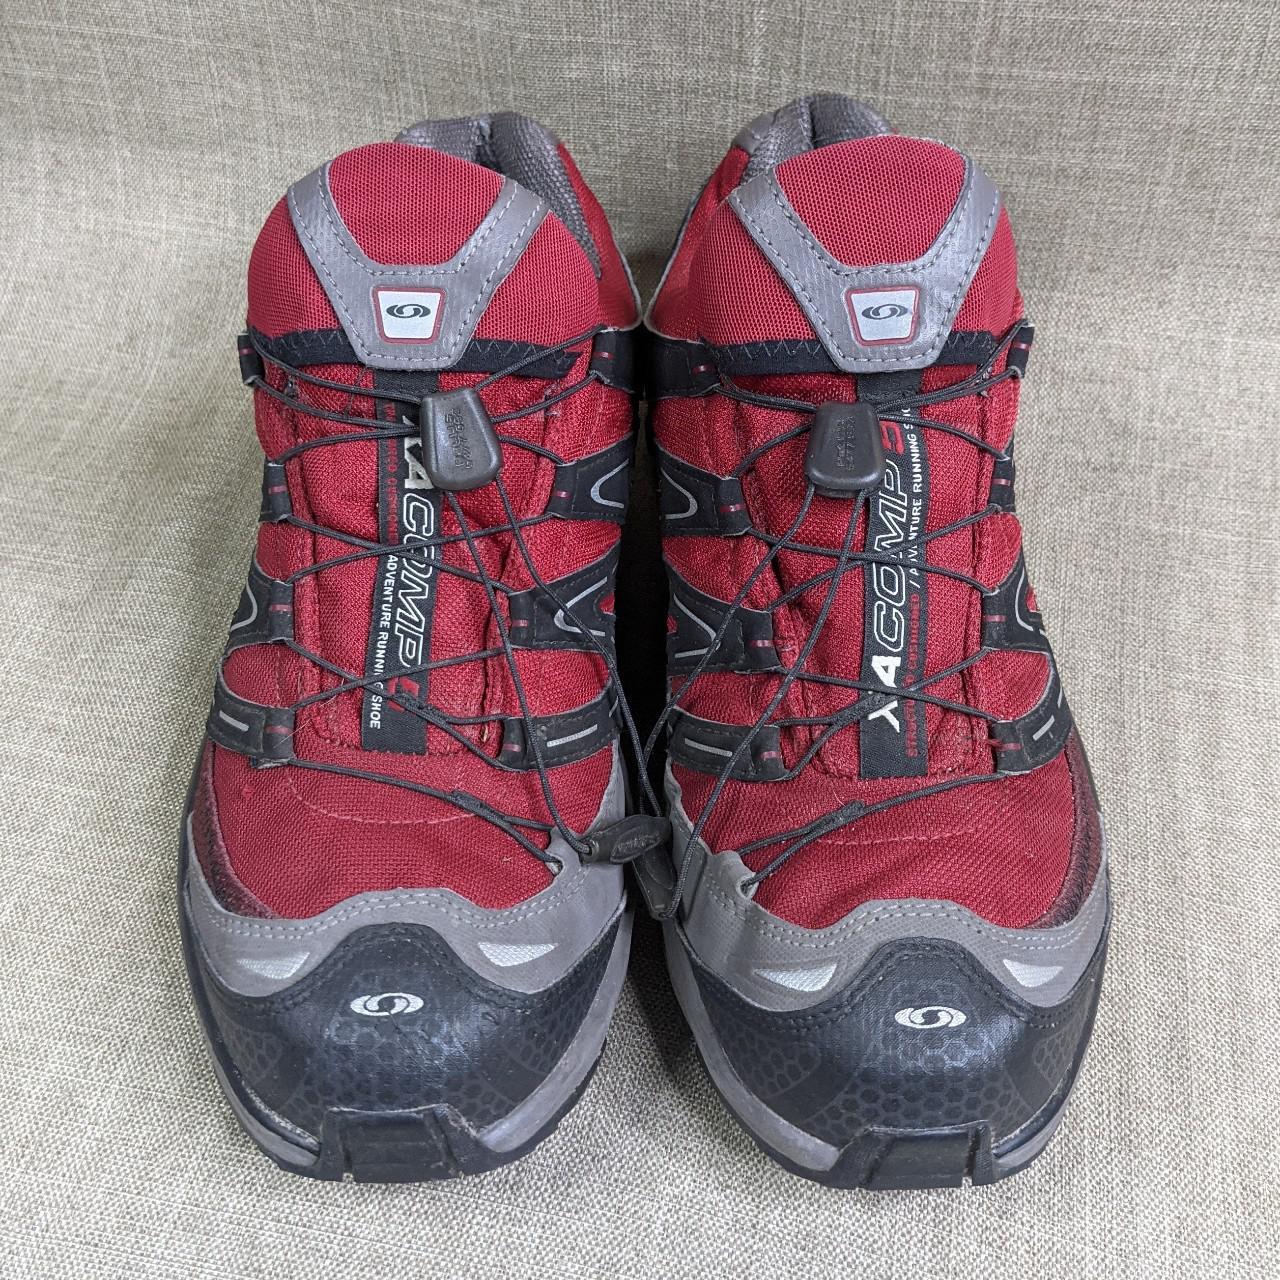 Product Image 2 - Salomon chunky sneakers. Women's size